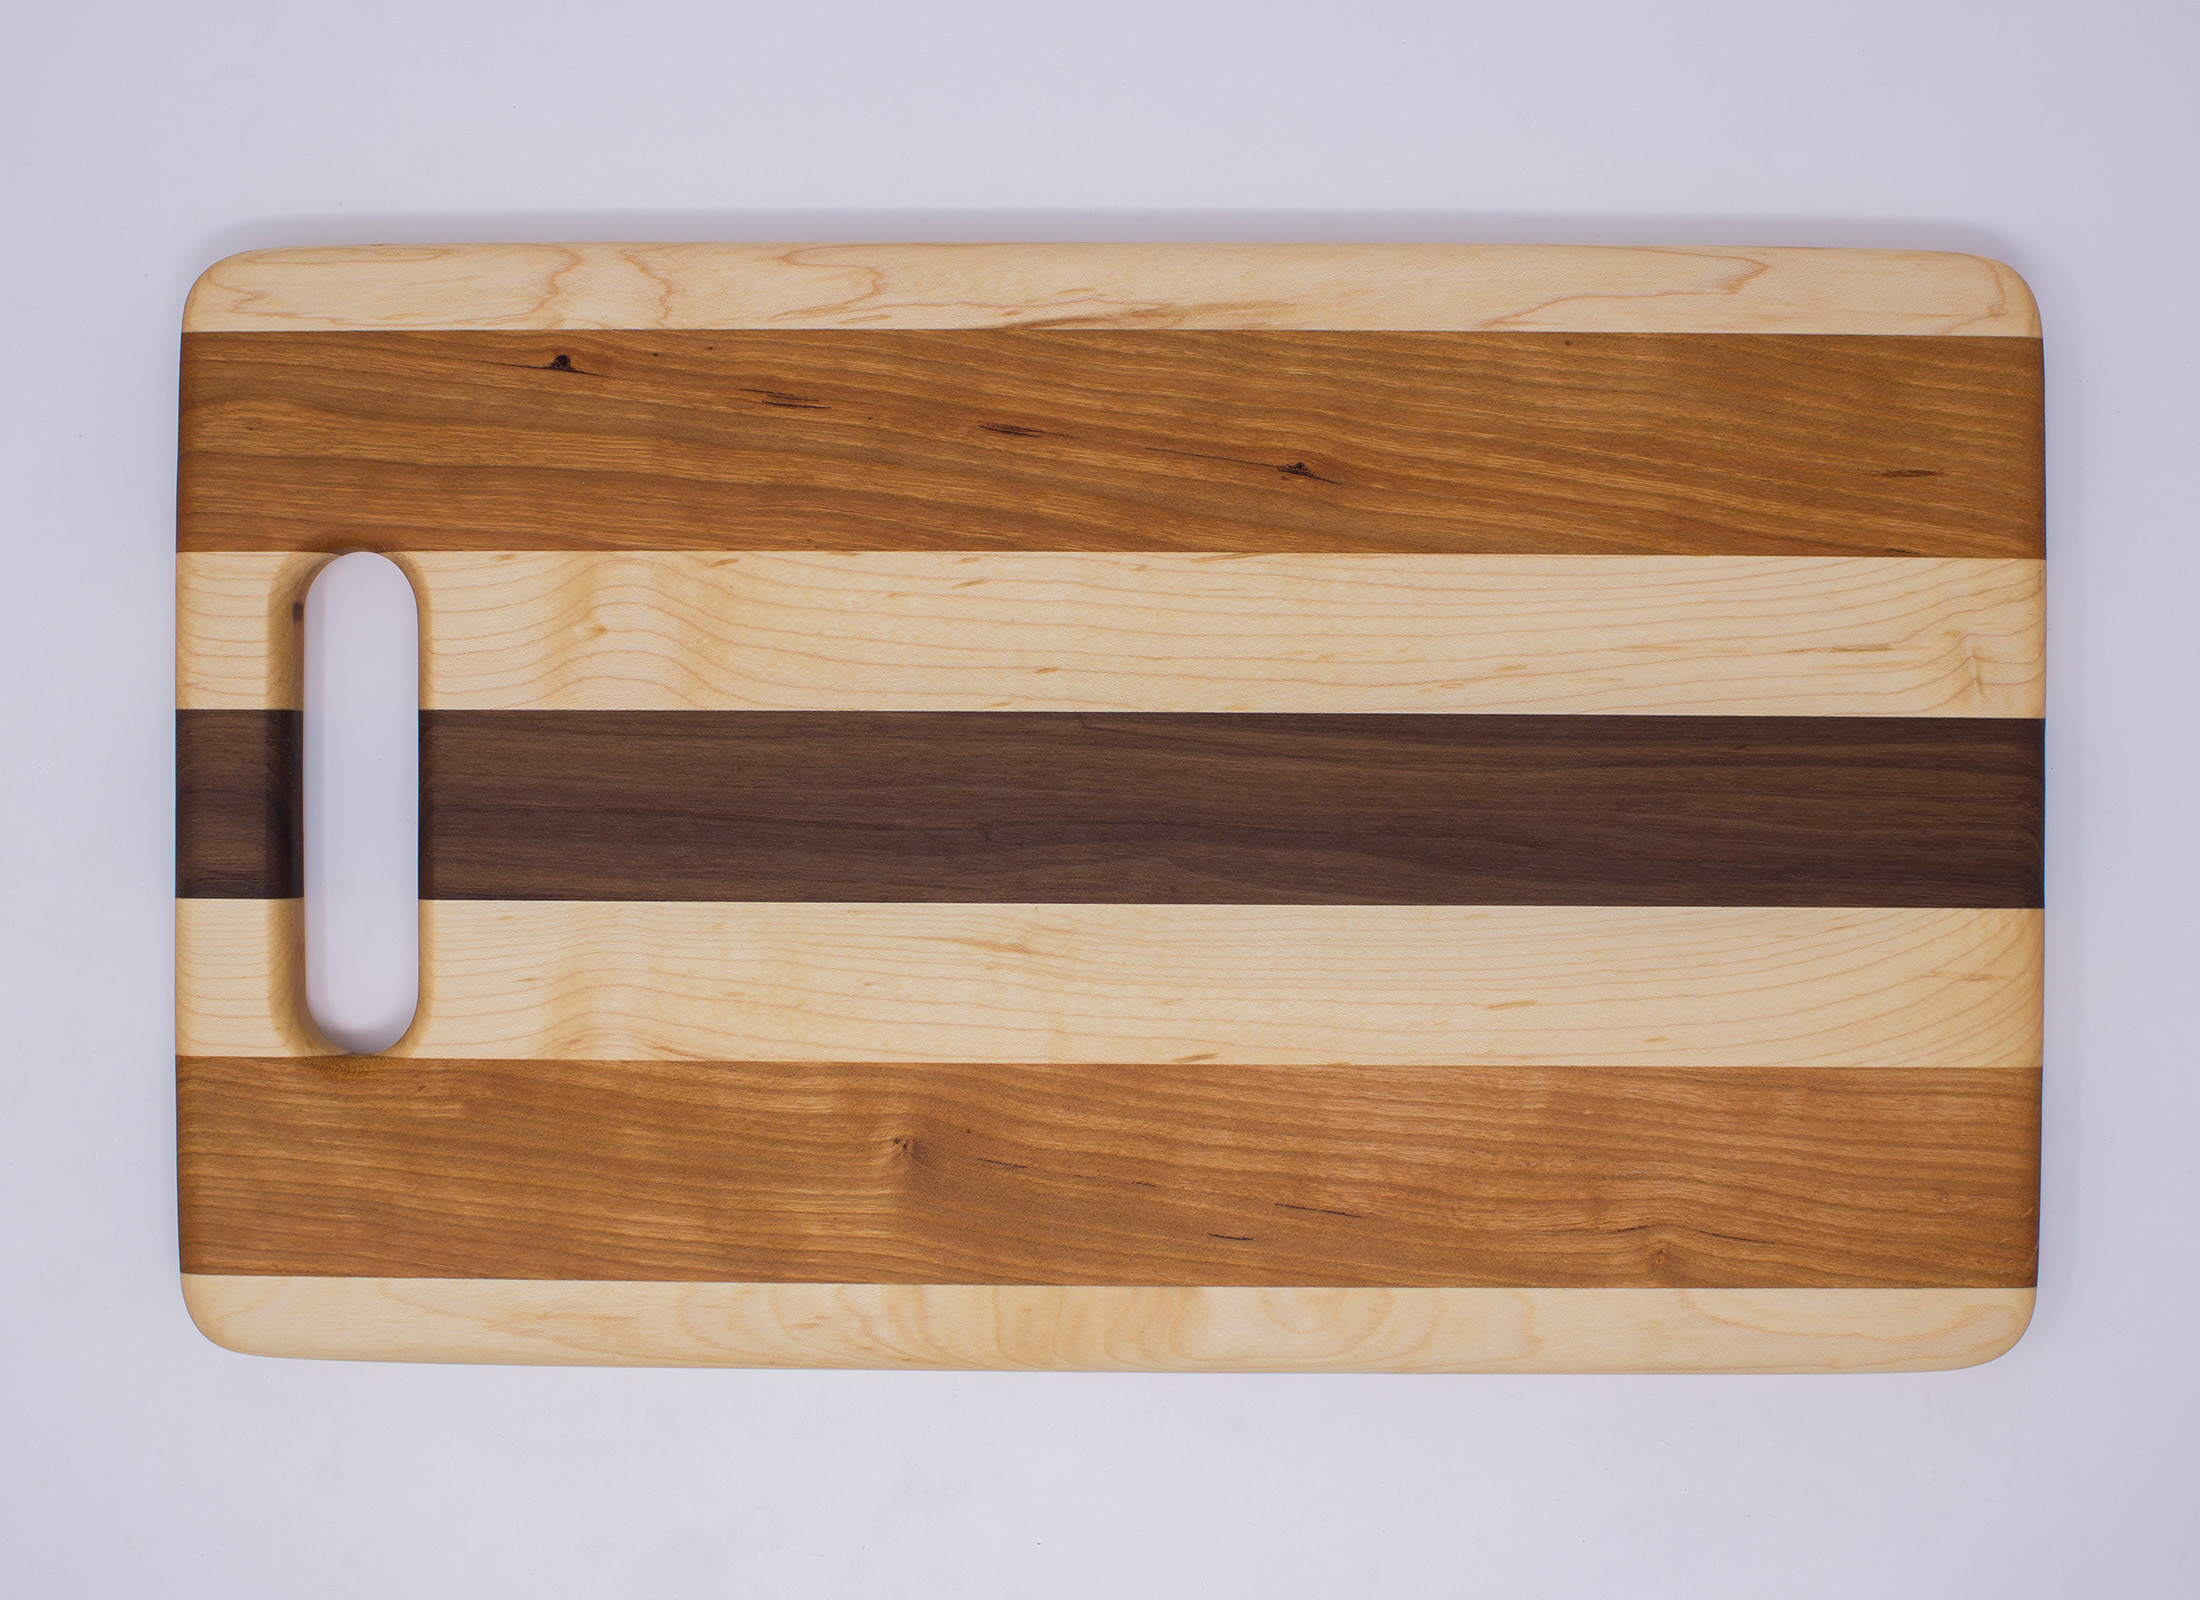 https://www.rockfordwoodcrafts.com/wp-content/uploads/Maple-Cherry-and-Walnut-Cutting-Board-with-Handle-Top-Down.jpg